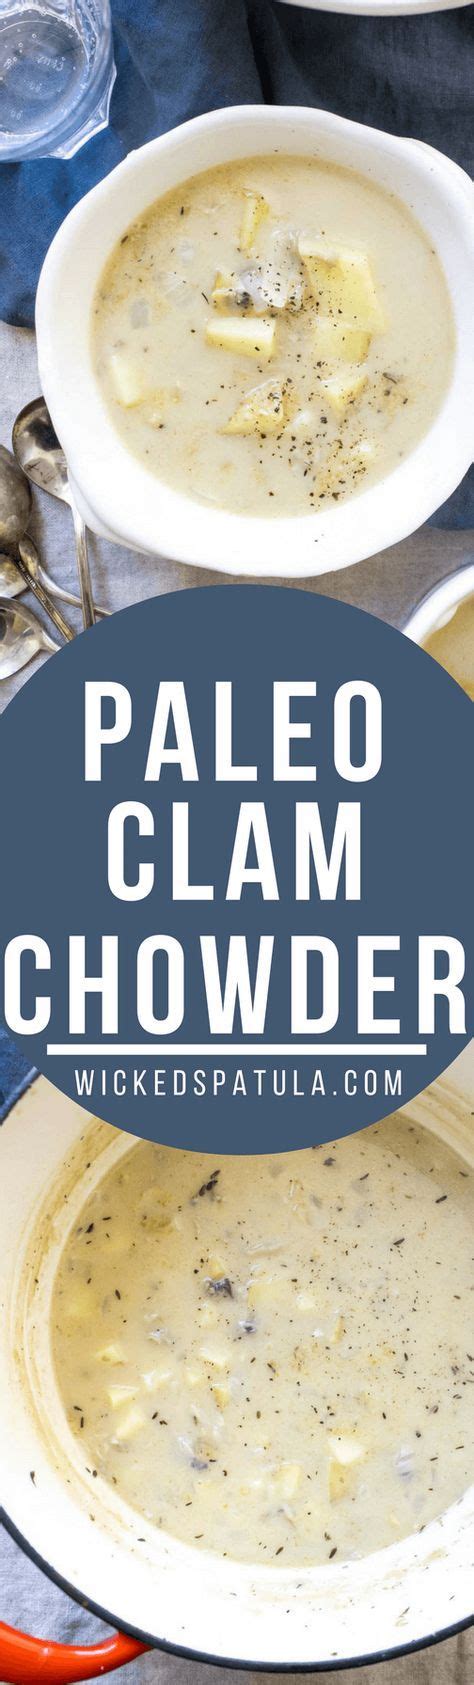 Delicious And Dairy Free Paleo Clam Chowder Such A Cozy Recipe For